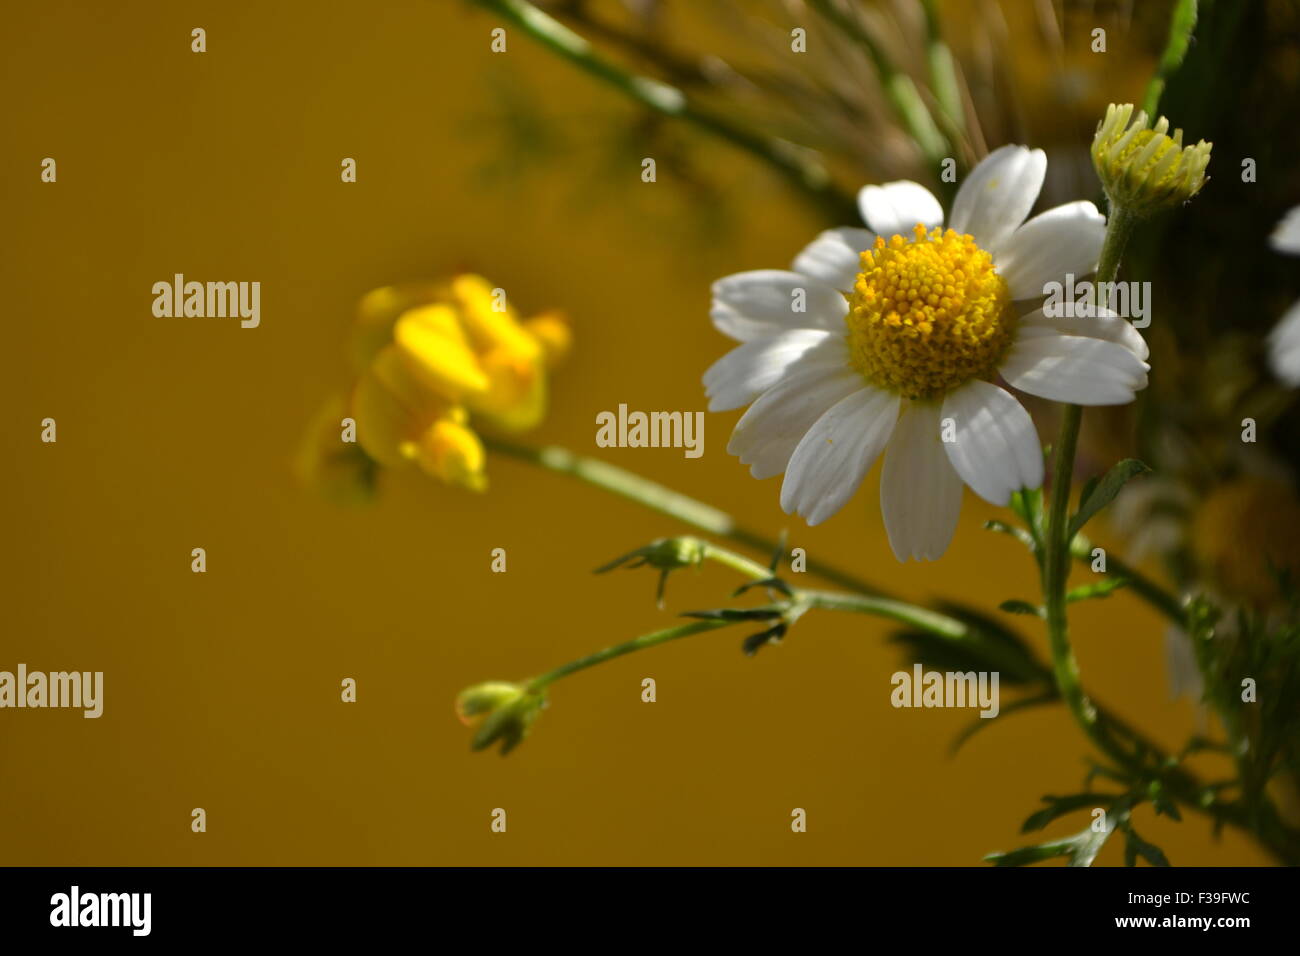 A wild flower,chamomile flower,colorful flowers,various flowers,yellow daisies,white daisies,in the dirt, flowers, Stock Photo